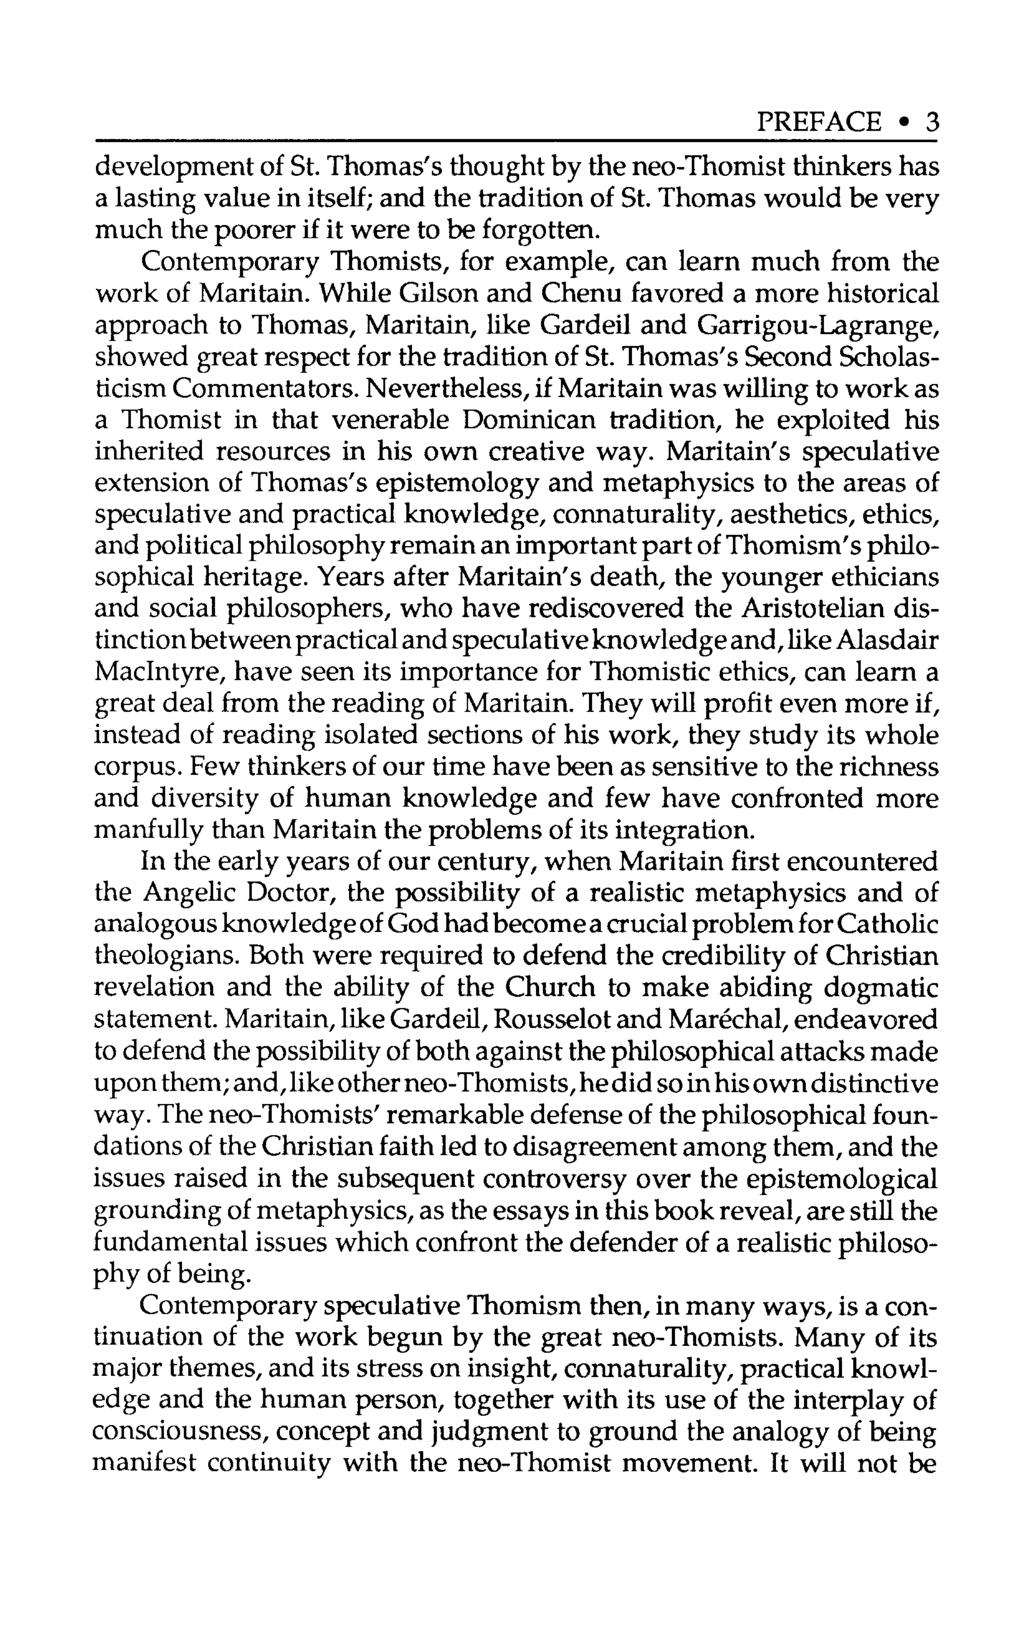 PREFACE 3 development of St. Thomas's thought by the neo-thomist thinkers has a lasting value in itself; and the tradition of St. Thomas would be very much the poorer if it were to be forgotten.